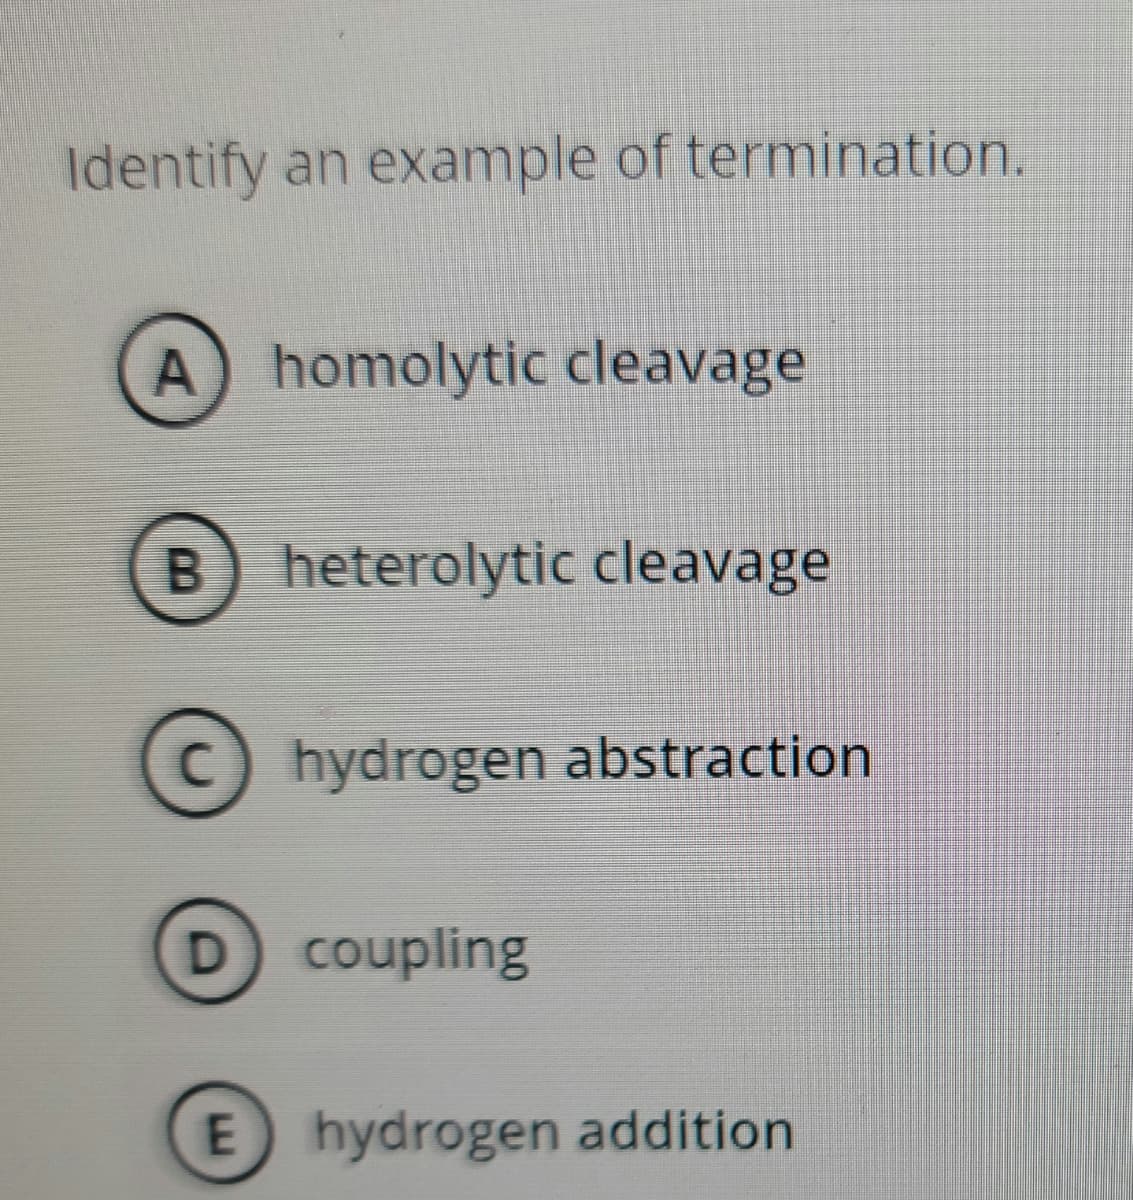 Identify
an example of termination.
A homolytic cleavage
B) heterolytic cleavage
hydrogen abstraction
coupling
E hydrogen addition
